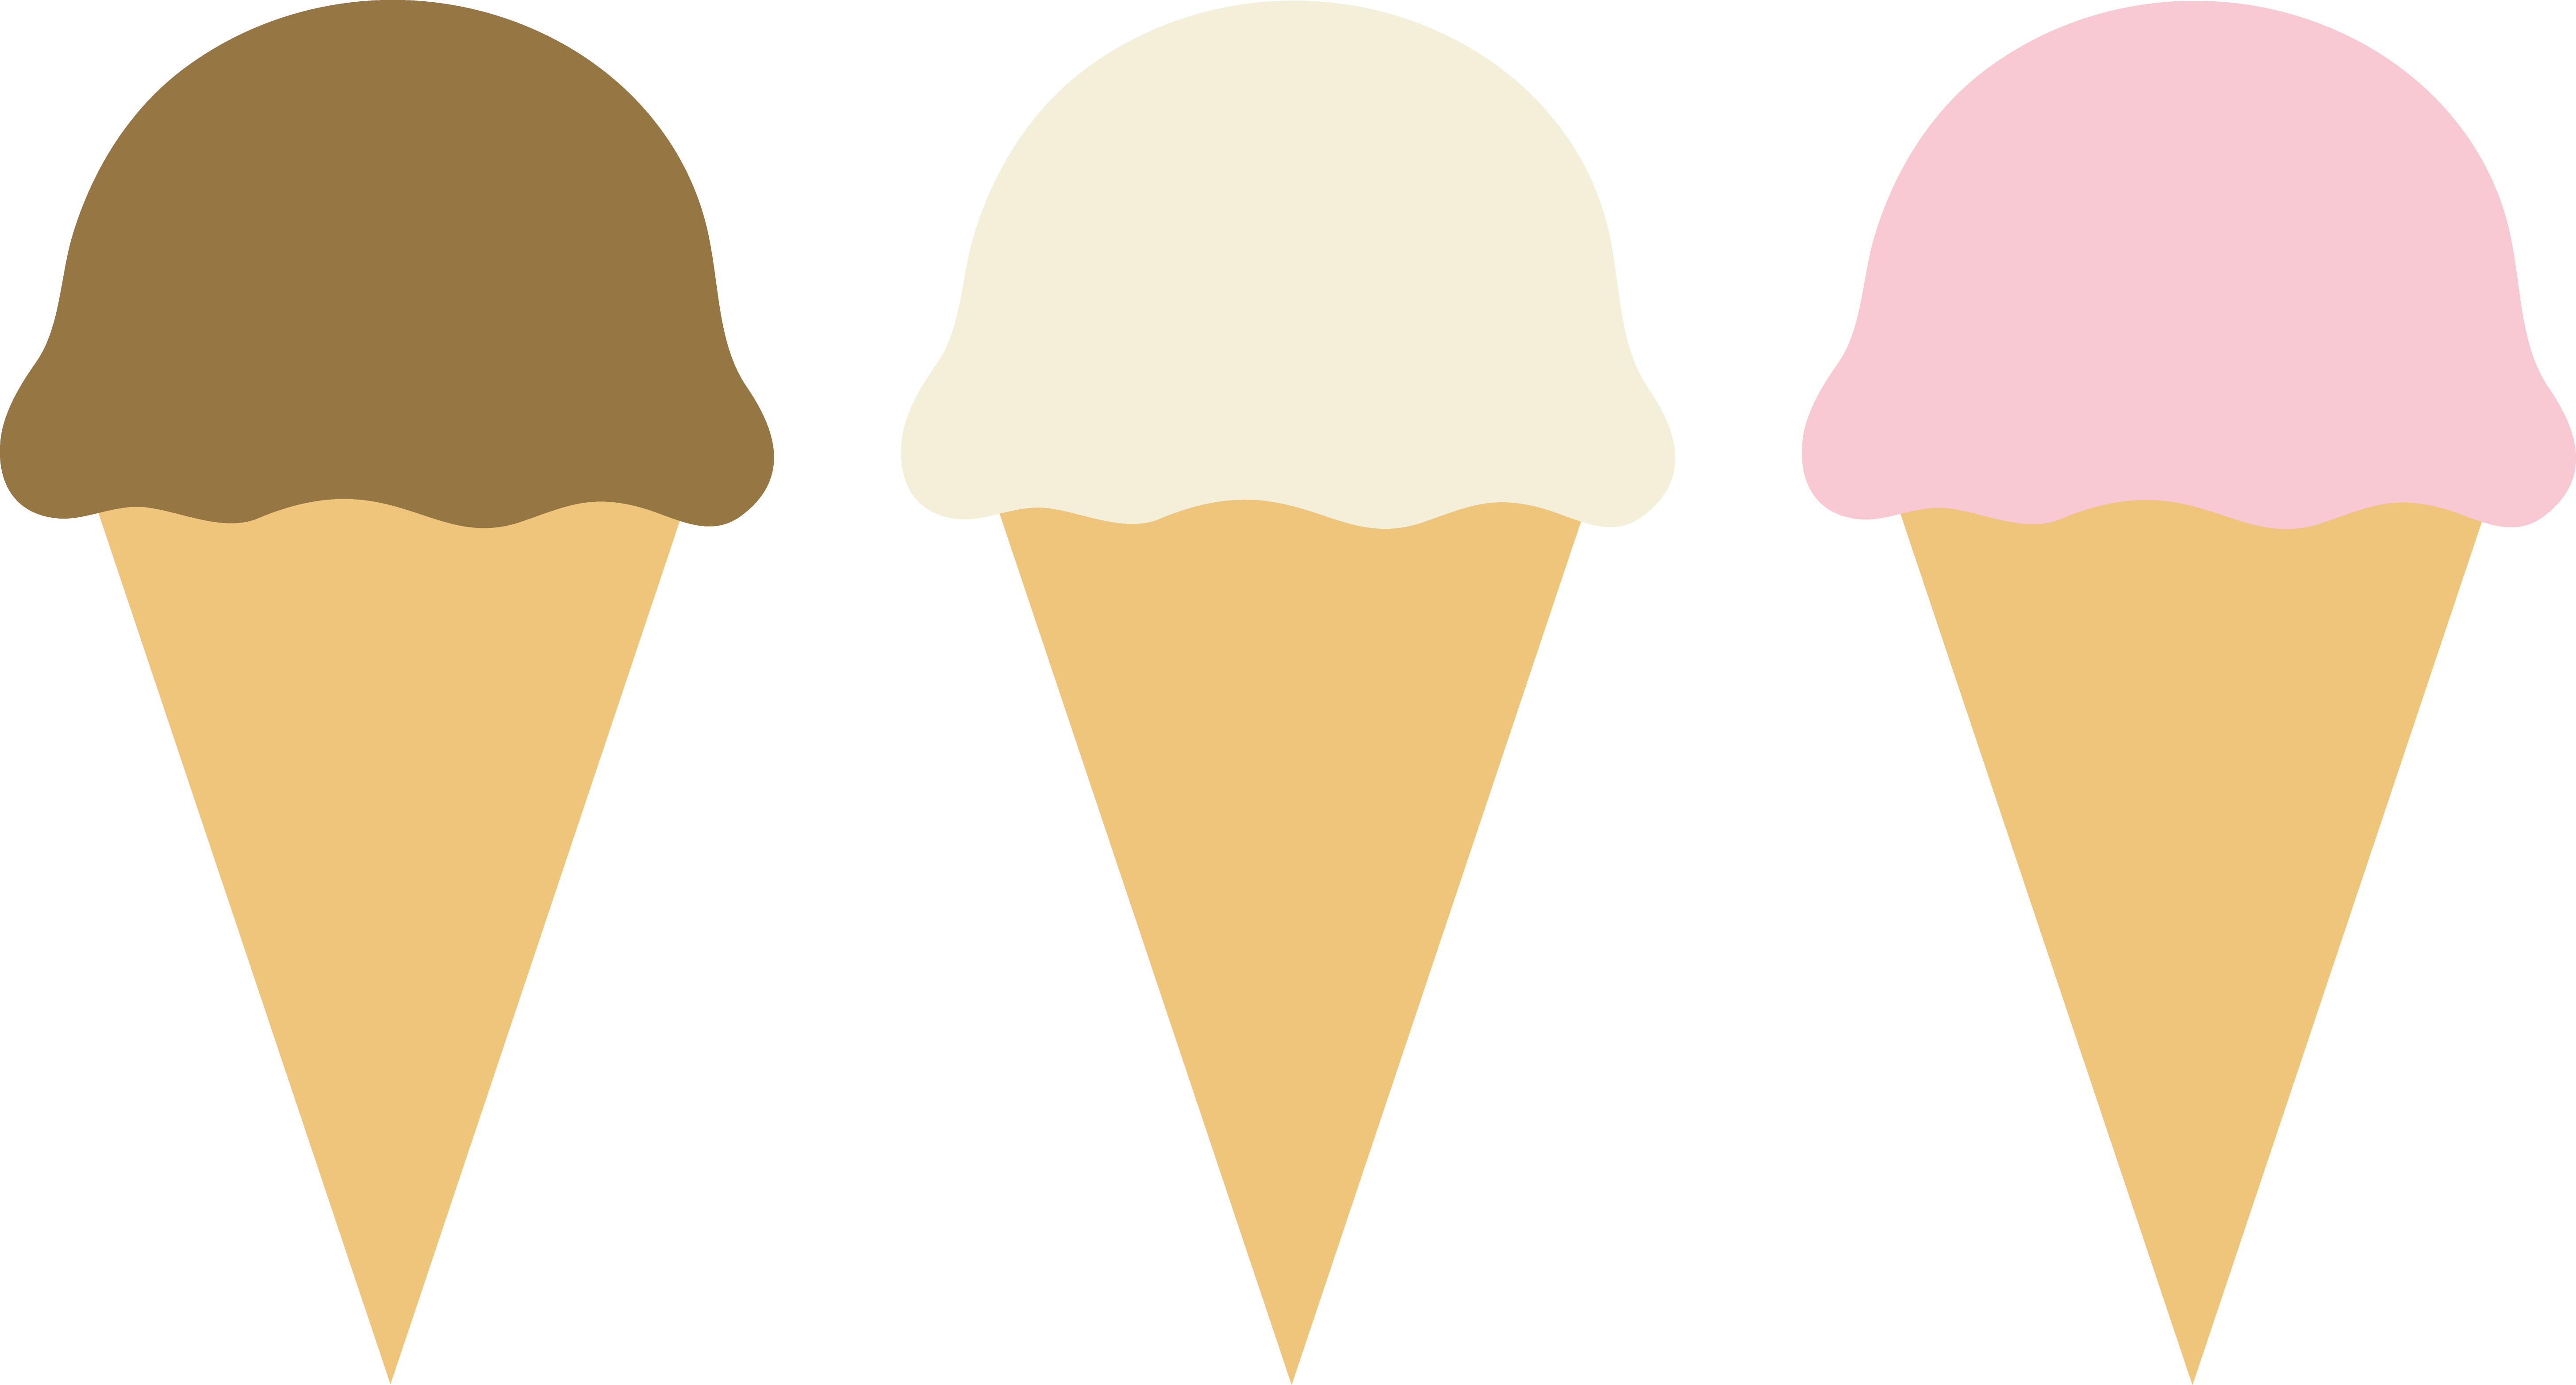 Ice Cream Cone Background png download - 1197*2048 - Free